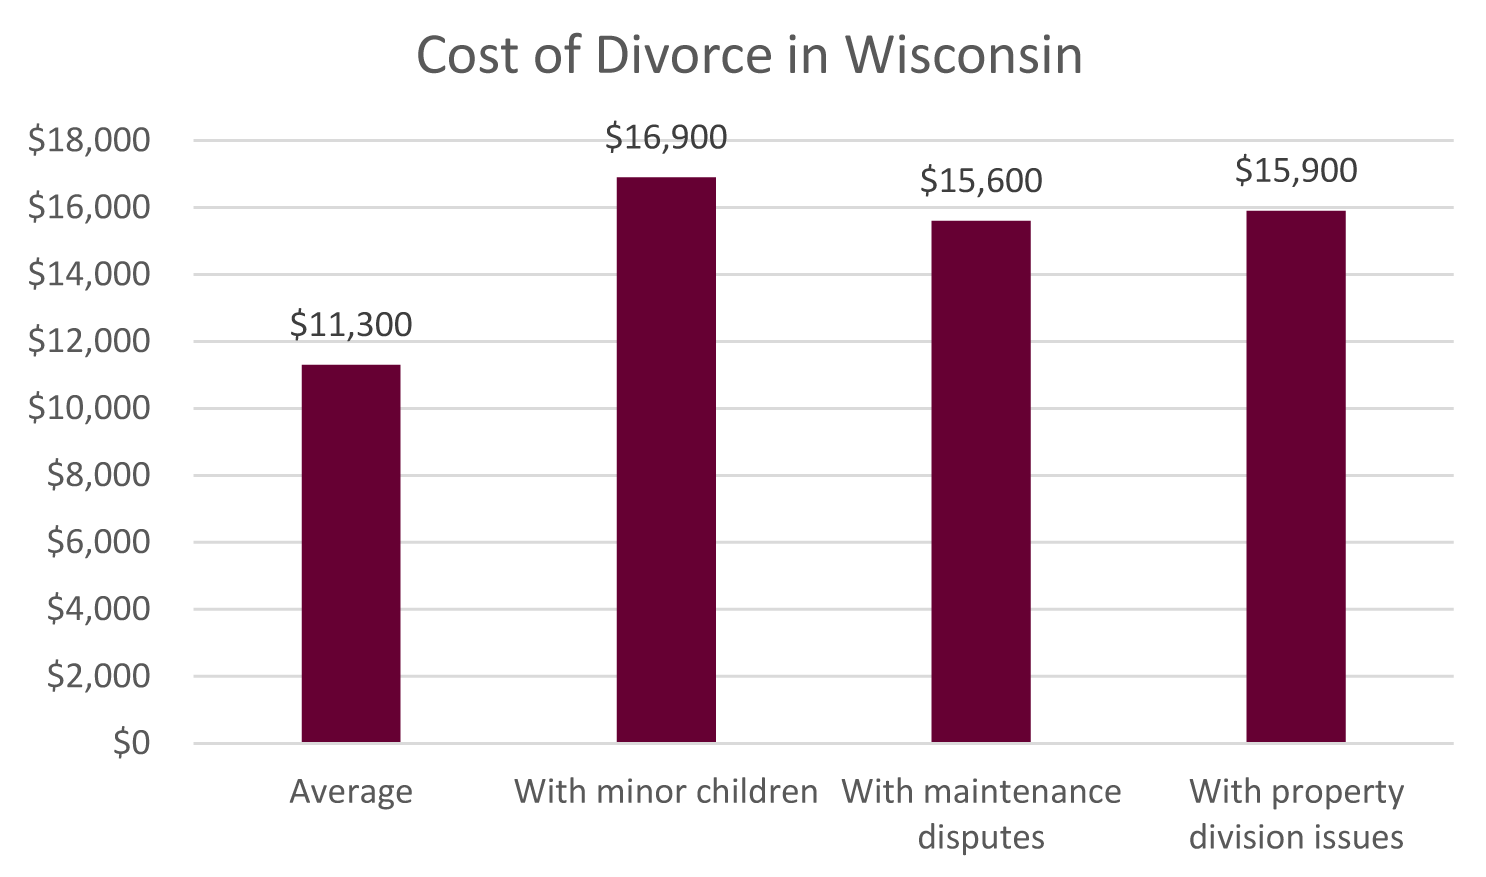 how much does it cost for a divorce attorney